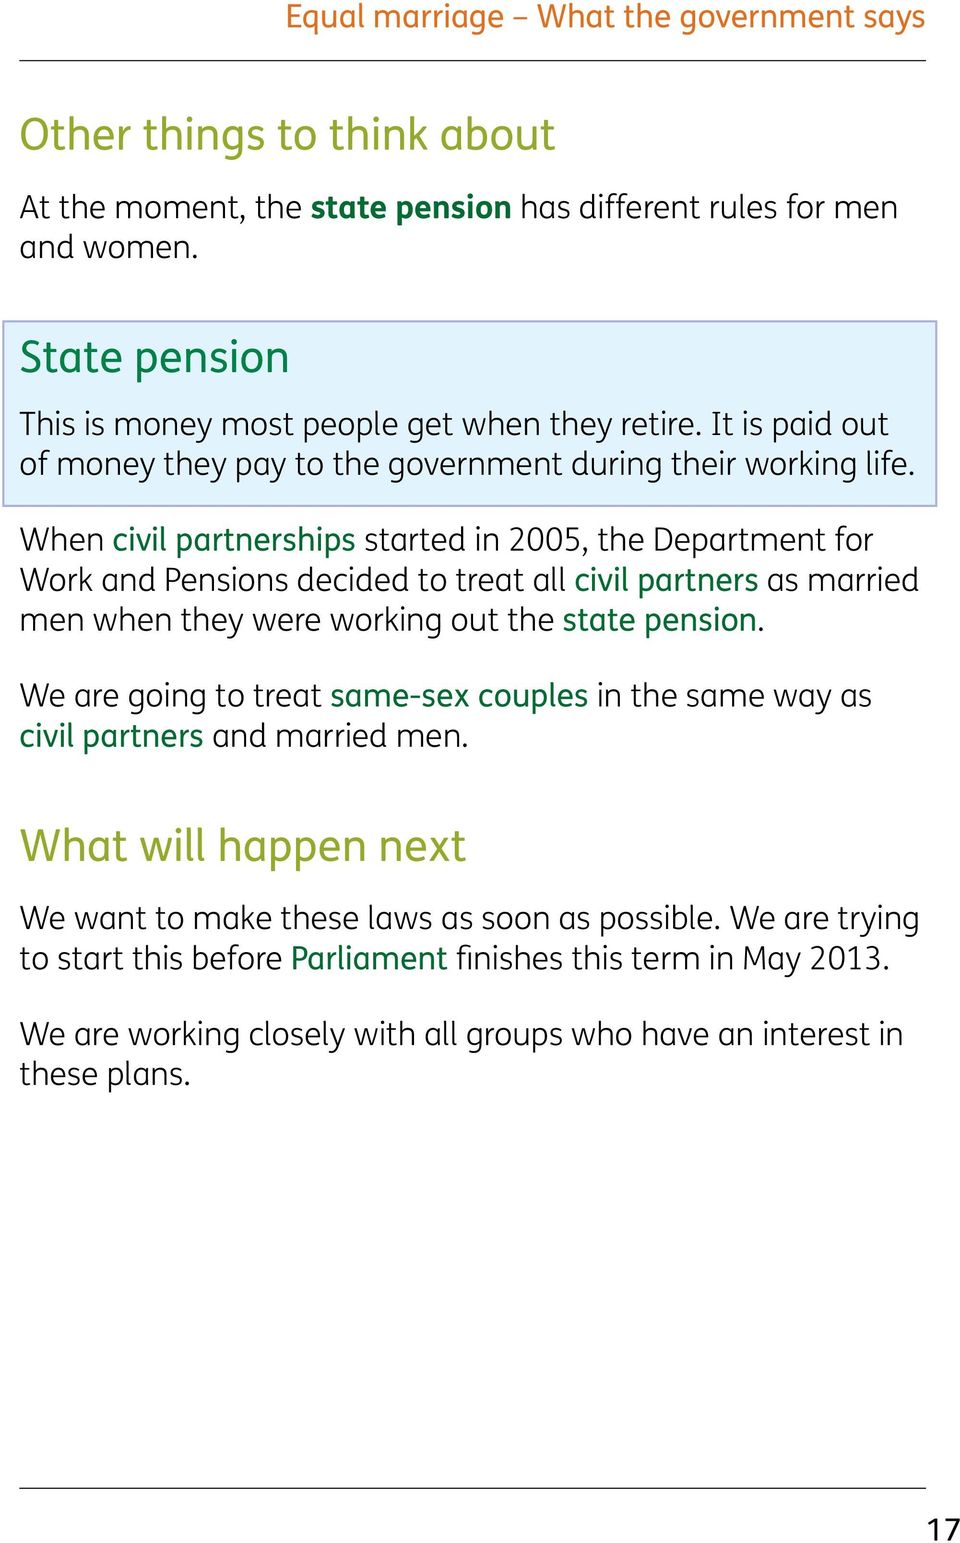 When civil partnerships started in 2005, the Department for Work and Pensions decided to treat all civil partners as married men when they were working out the state pension.